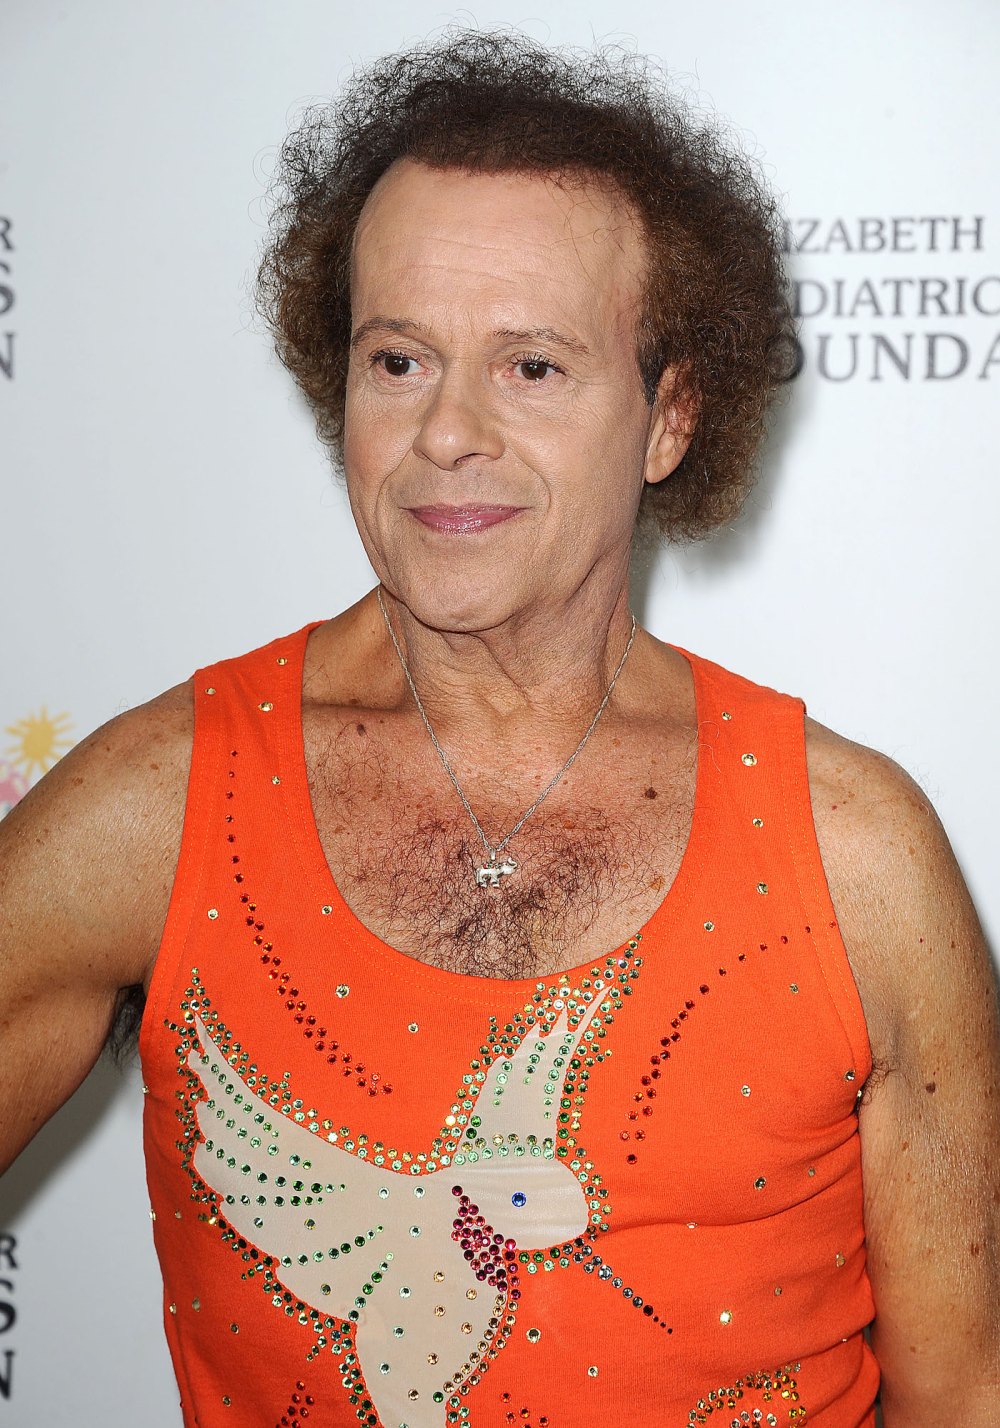 Richard Simmons spoke about his loss in his last interview before his death. It weighs on the heart